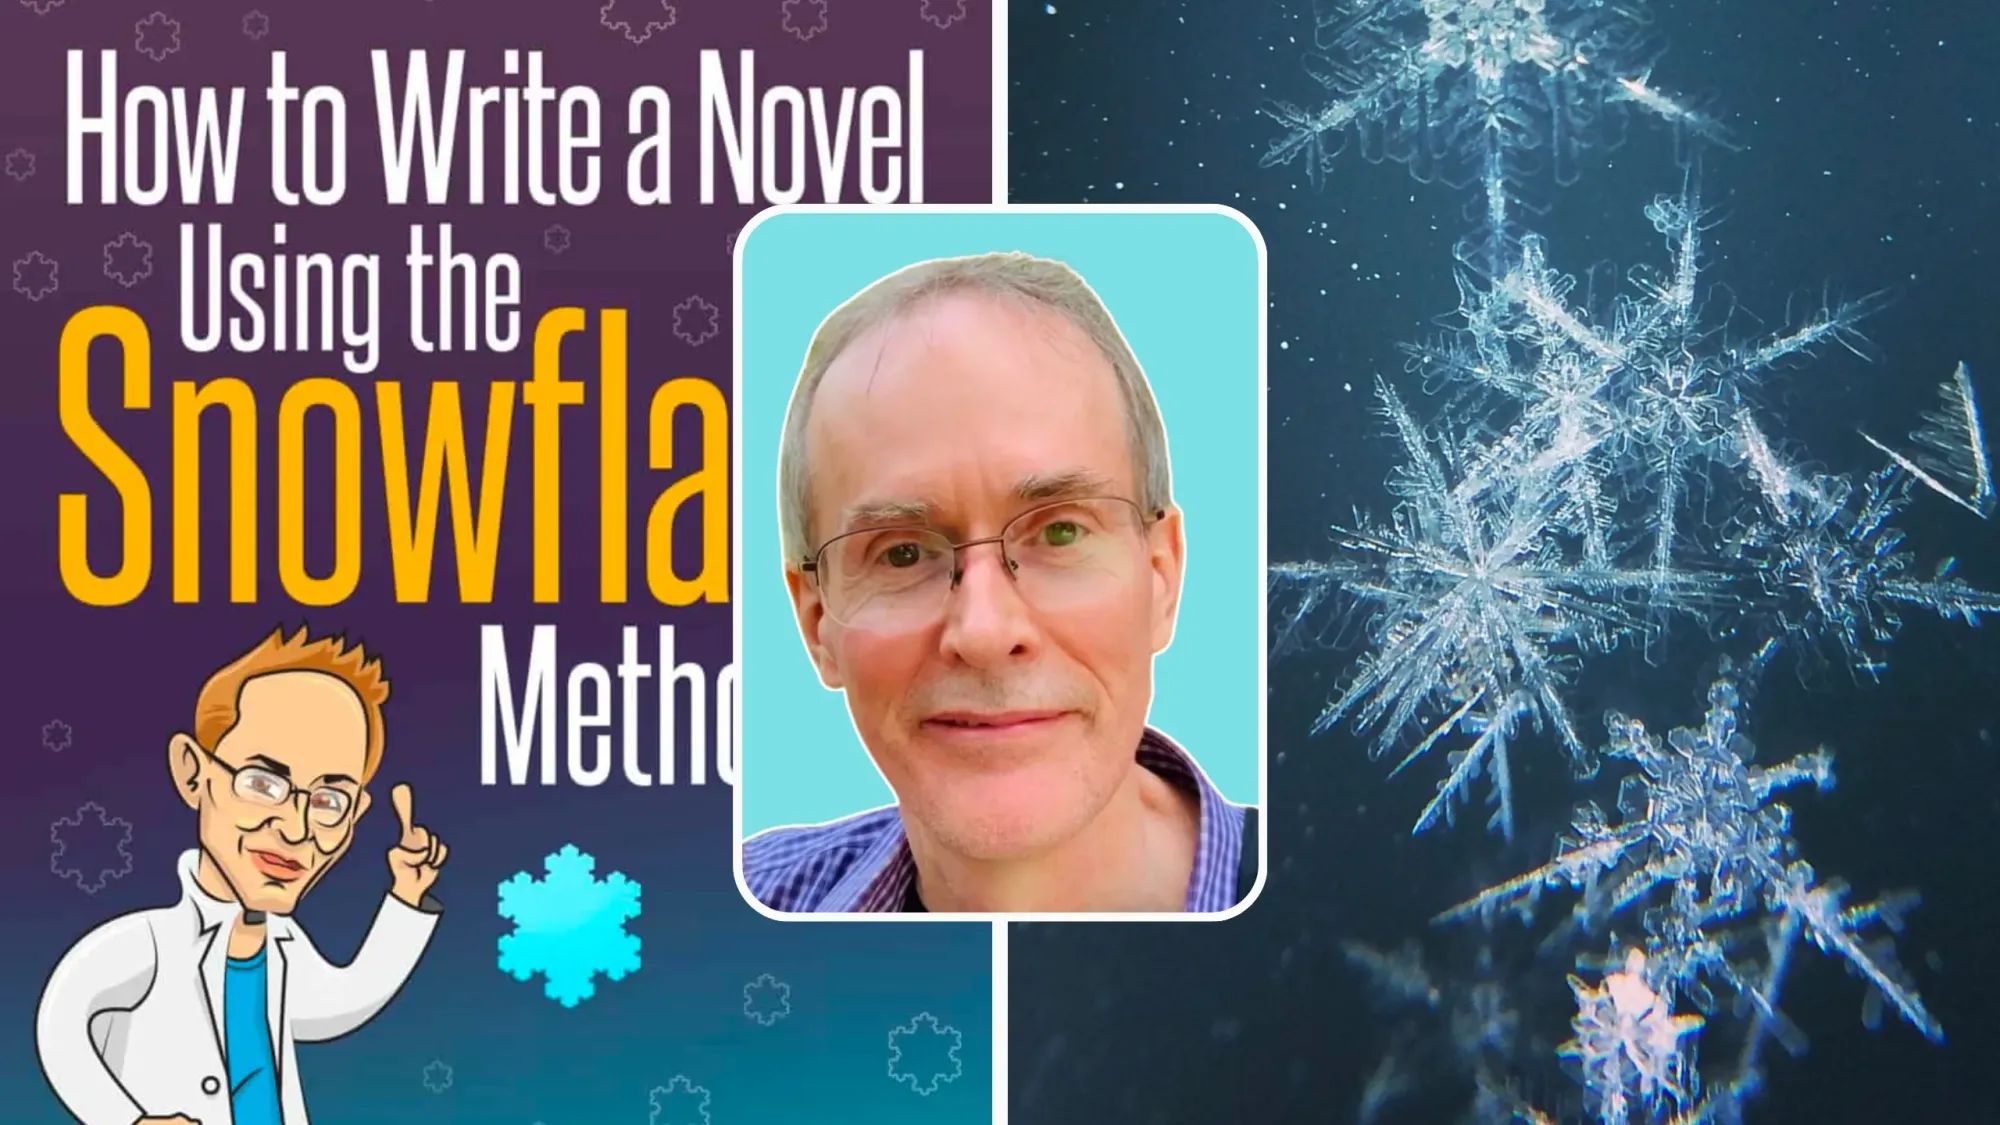 Randy Ingermanson's portrait over cover of his plot method book and magnified view of snowflakes.